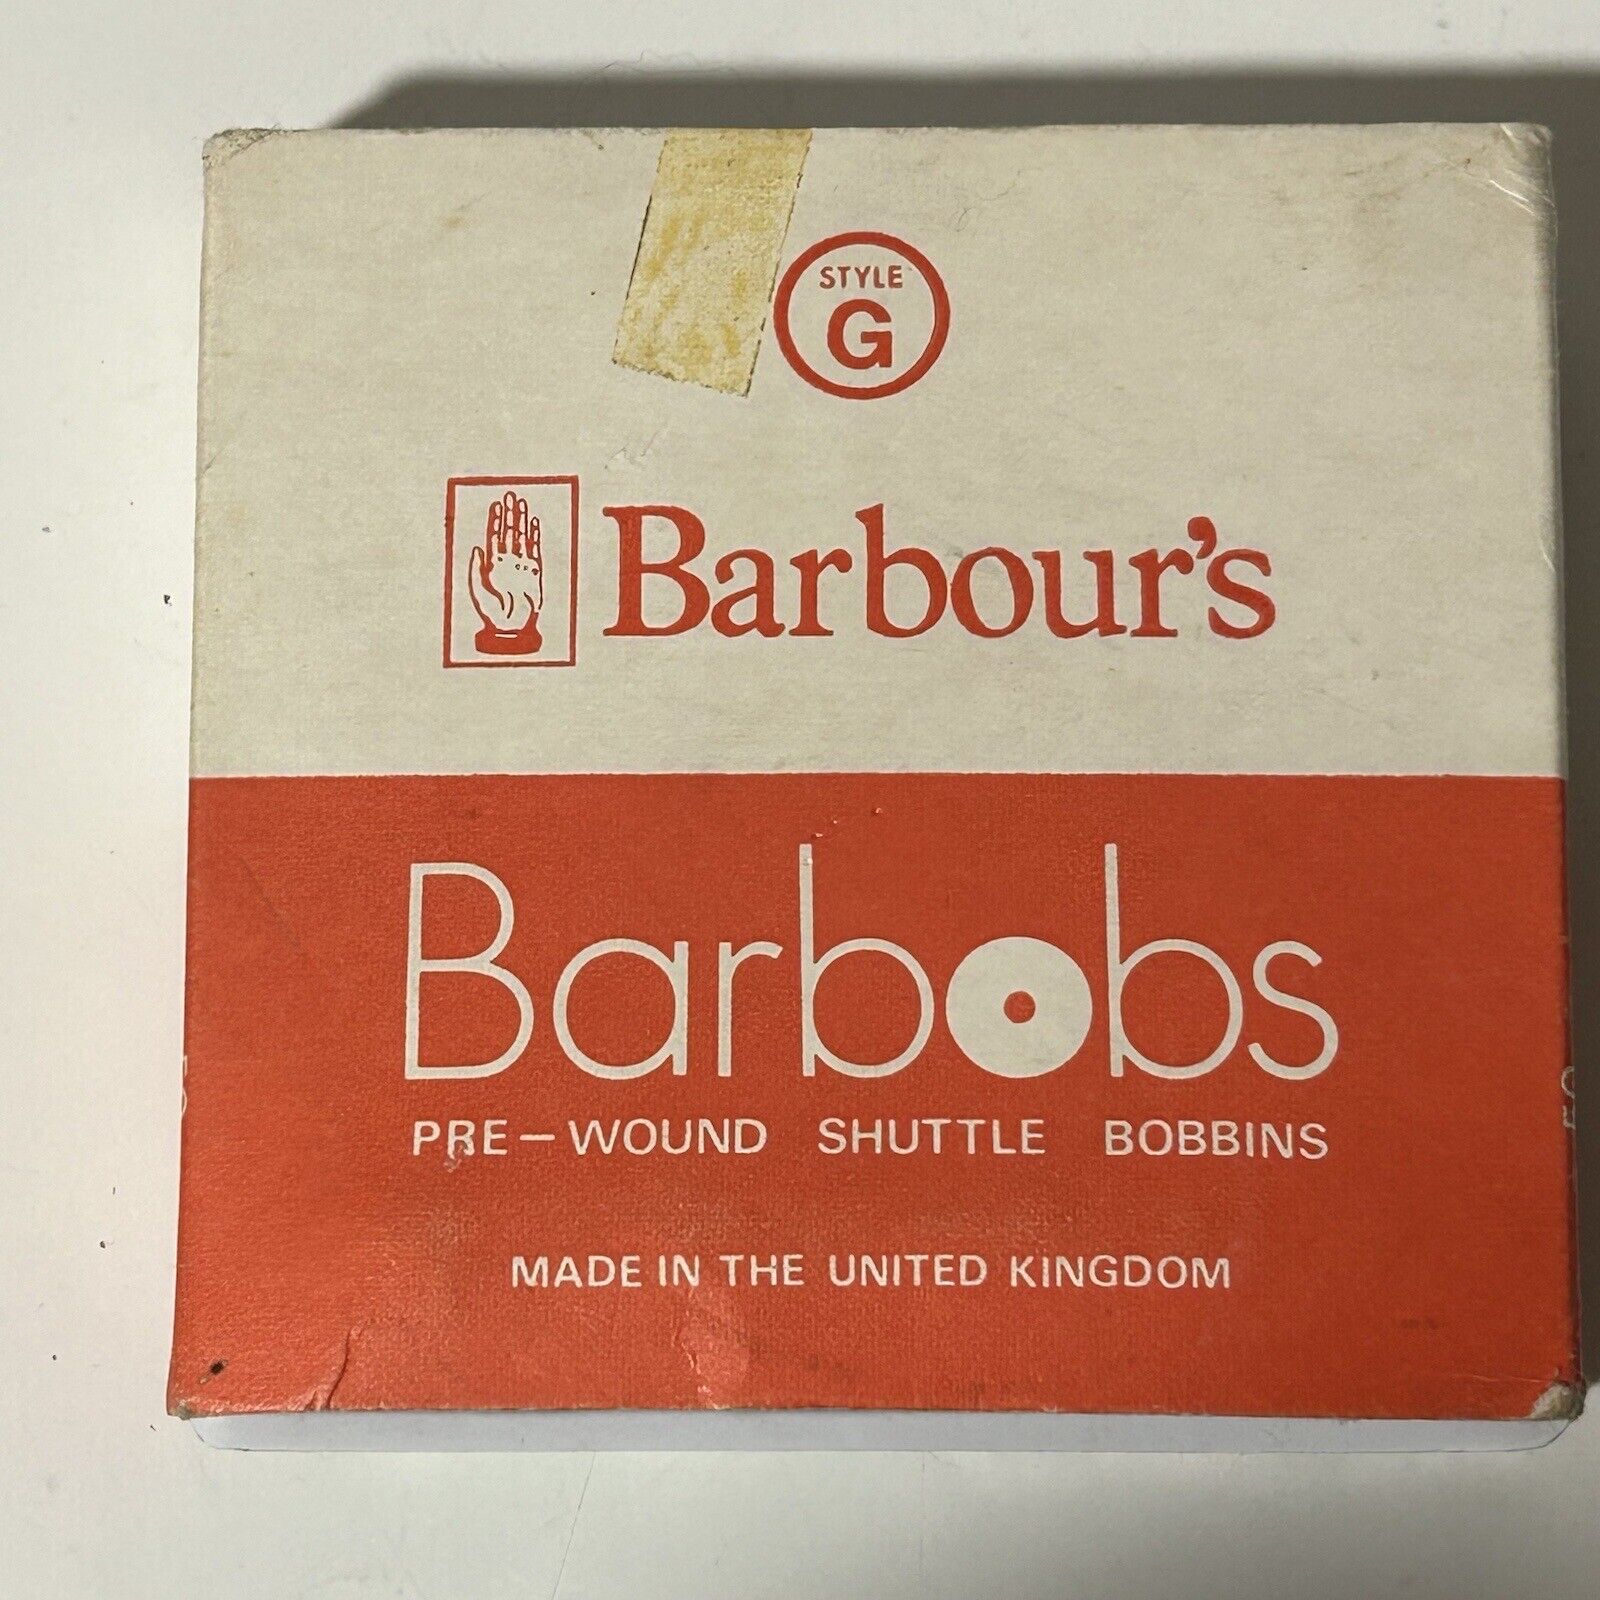 Barbour\'s Barbobs Pkg Of 48 Nylon Pre-wound Shuttle Bobbins Style G Made In UK